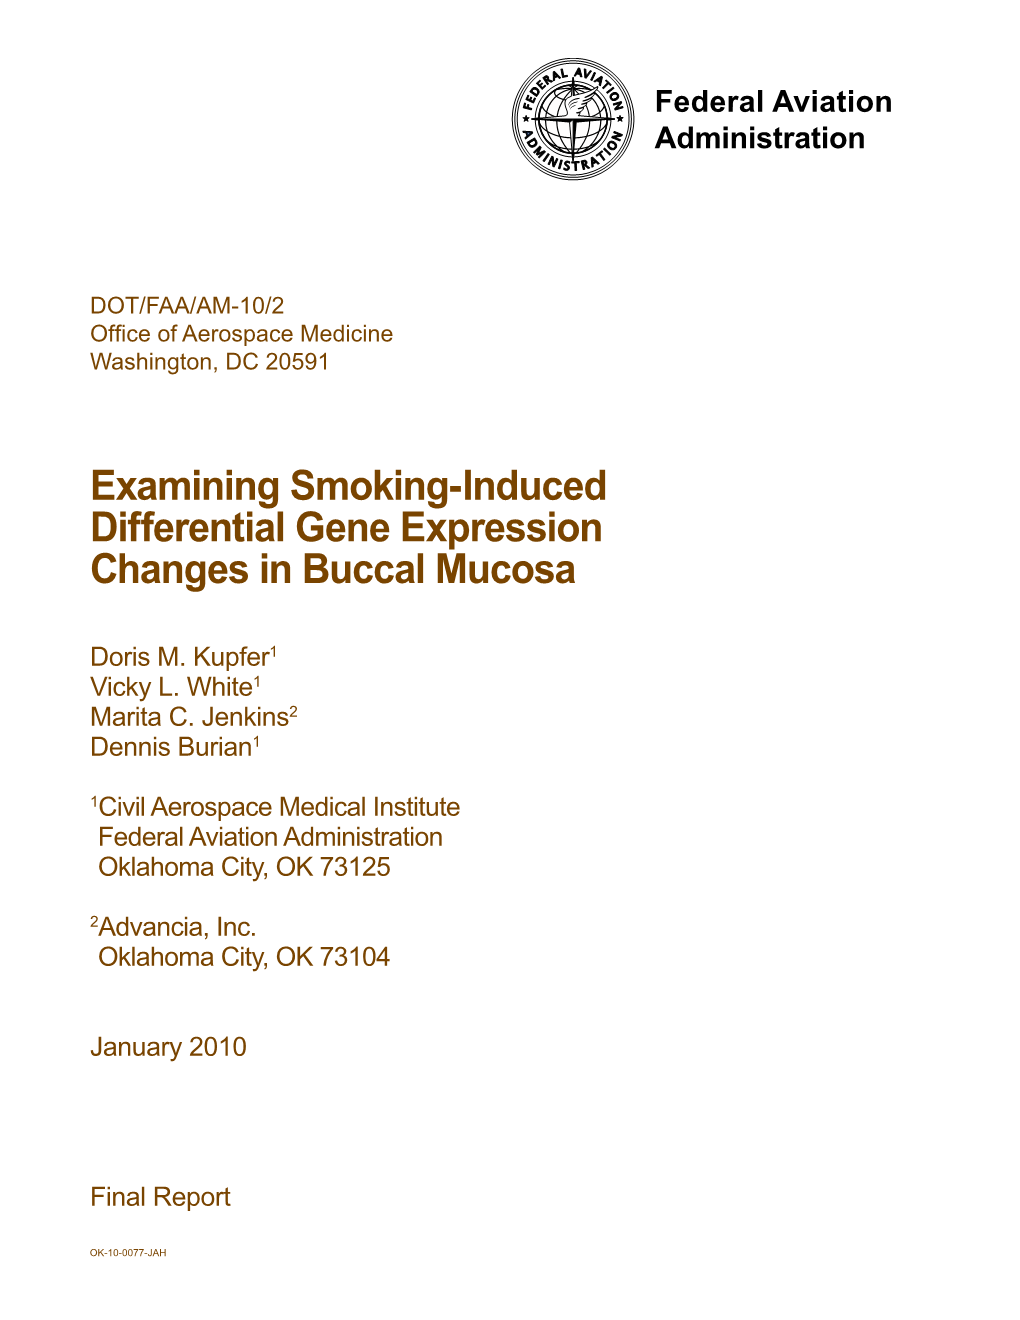 Examining Smoking-Induced Differential Gene Expression Changes in Buccal Mucosa